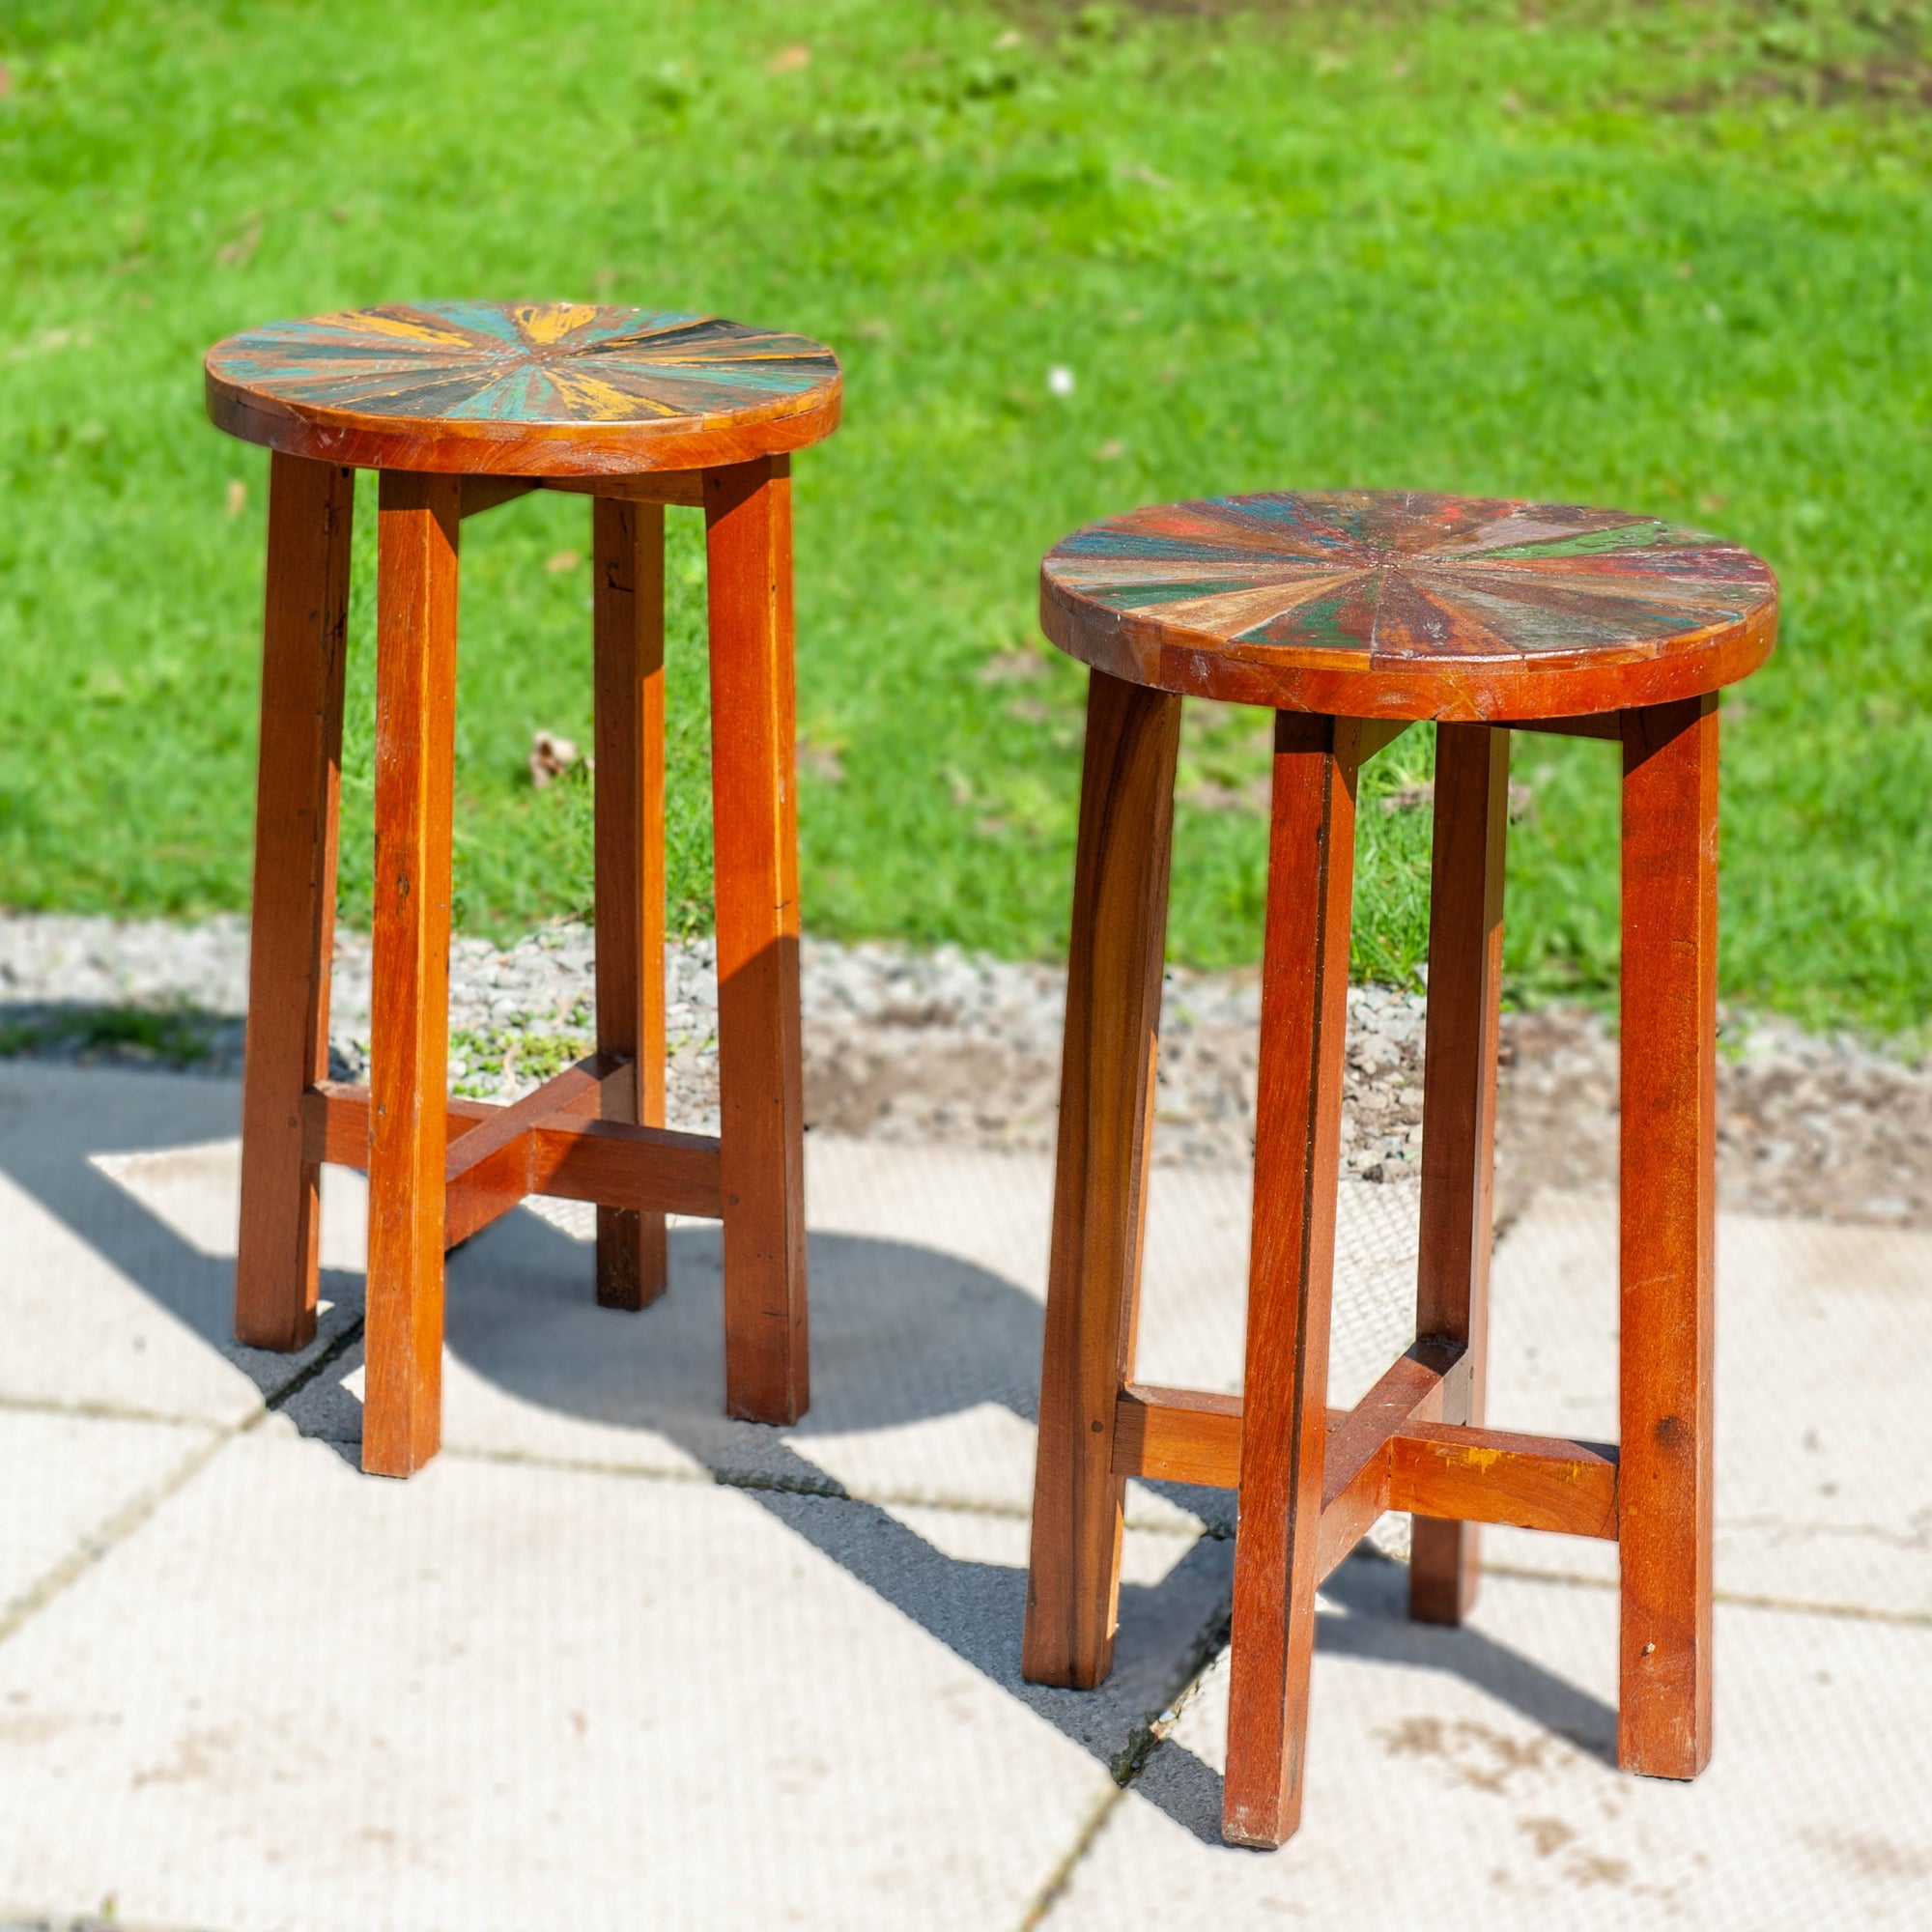 Medium size stools made of reclaimed teak wood with colourful seats